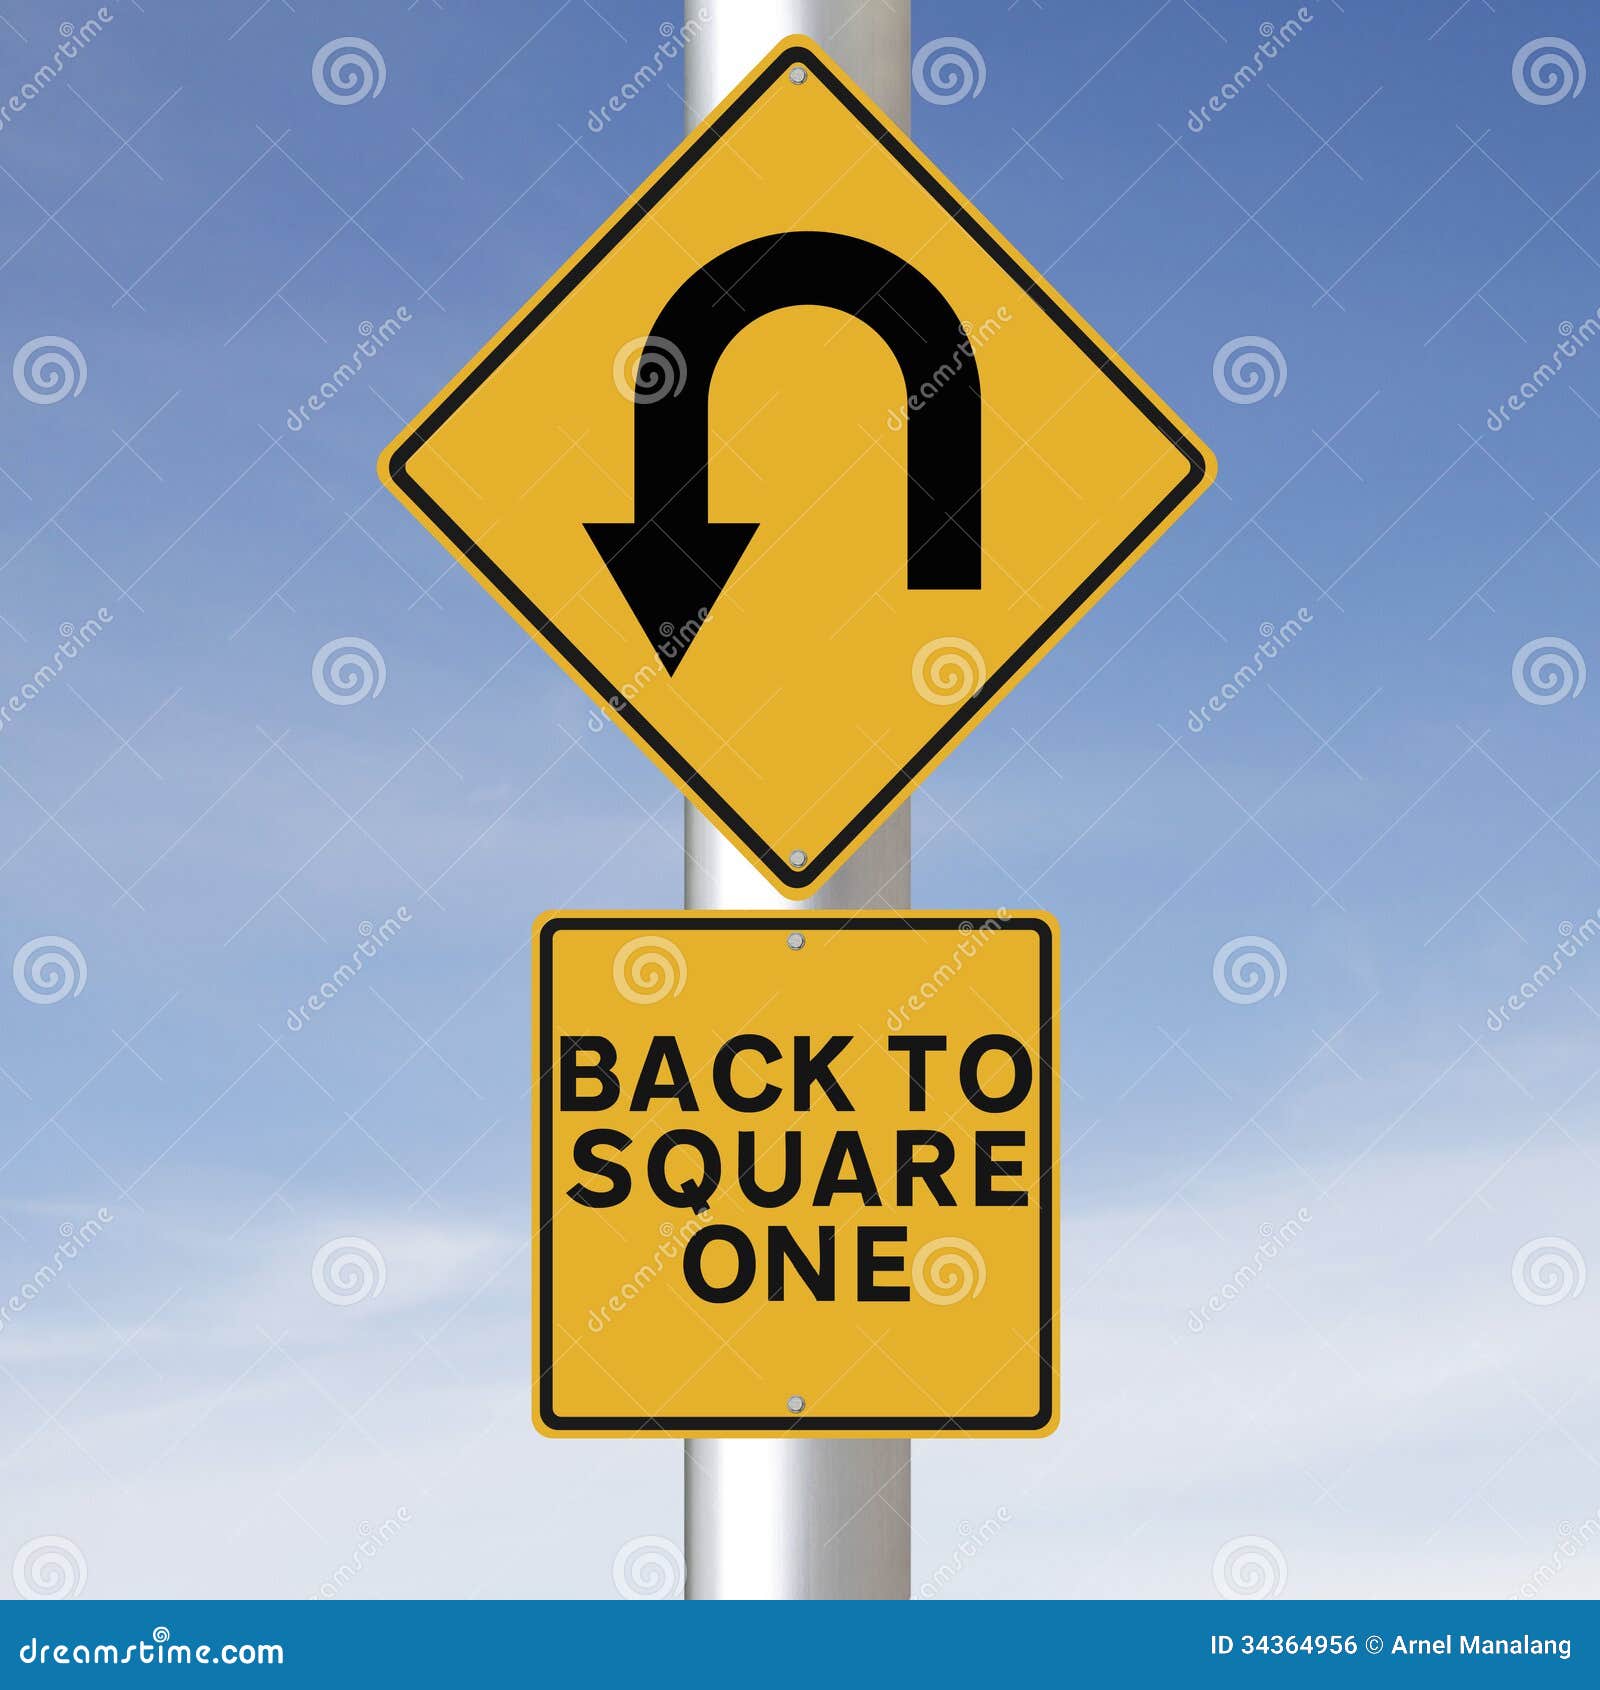 632 Back To Square One Photos Free Royalty Free Stock Photos From Dreamstime